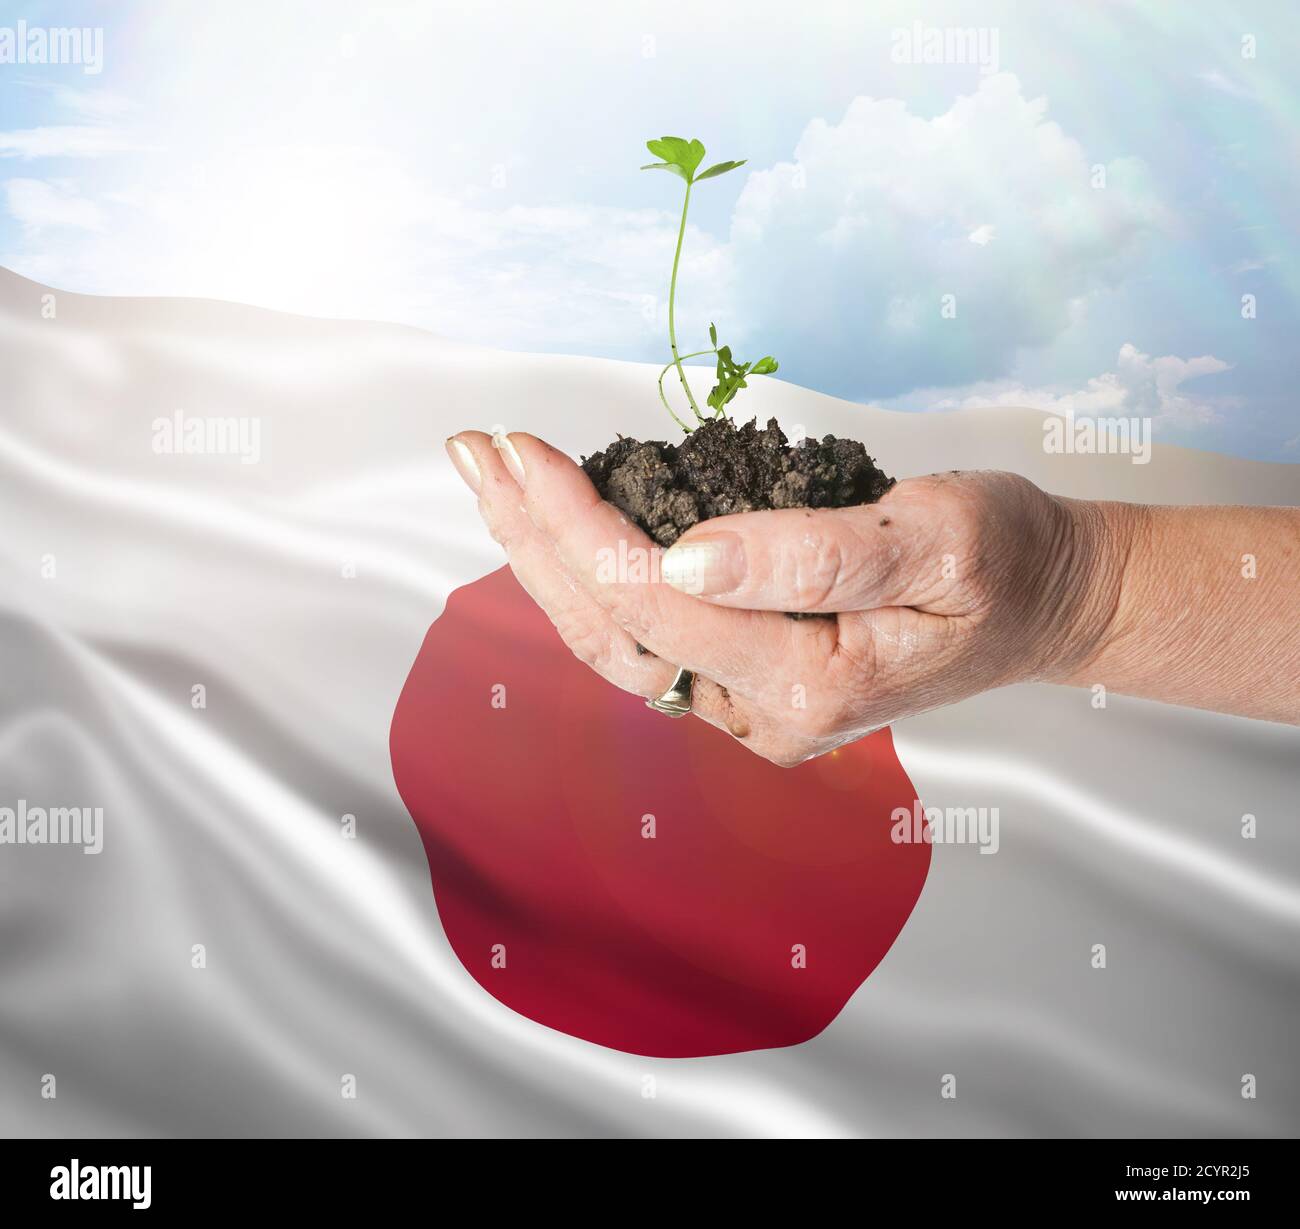 Japan growth and new beginning. Green renewable energy and ecology concept. Hand holding young plant. Stock Photo